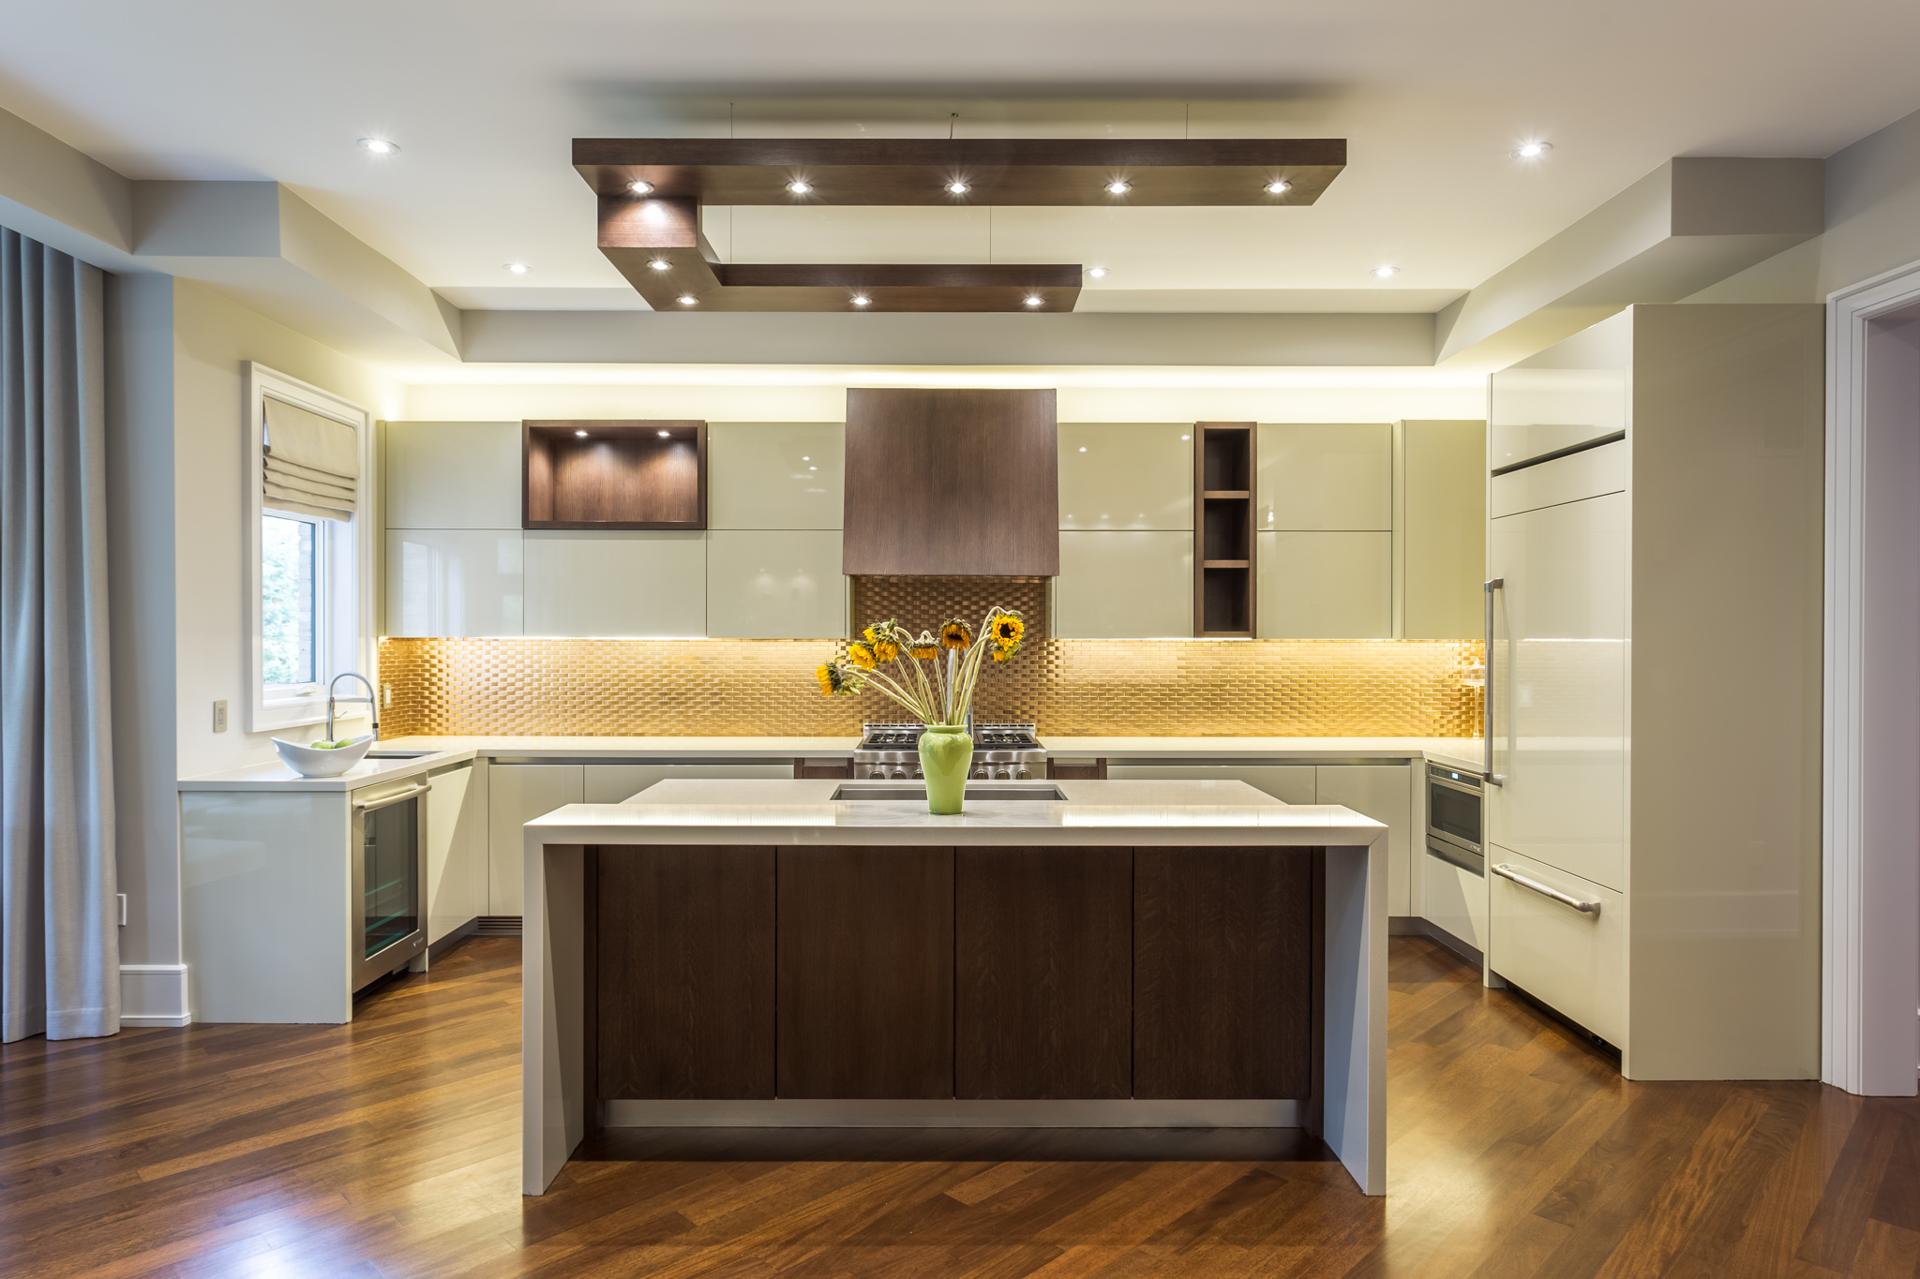 High-end kitchens